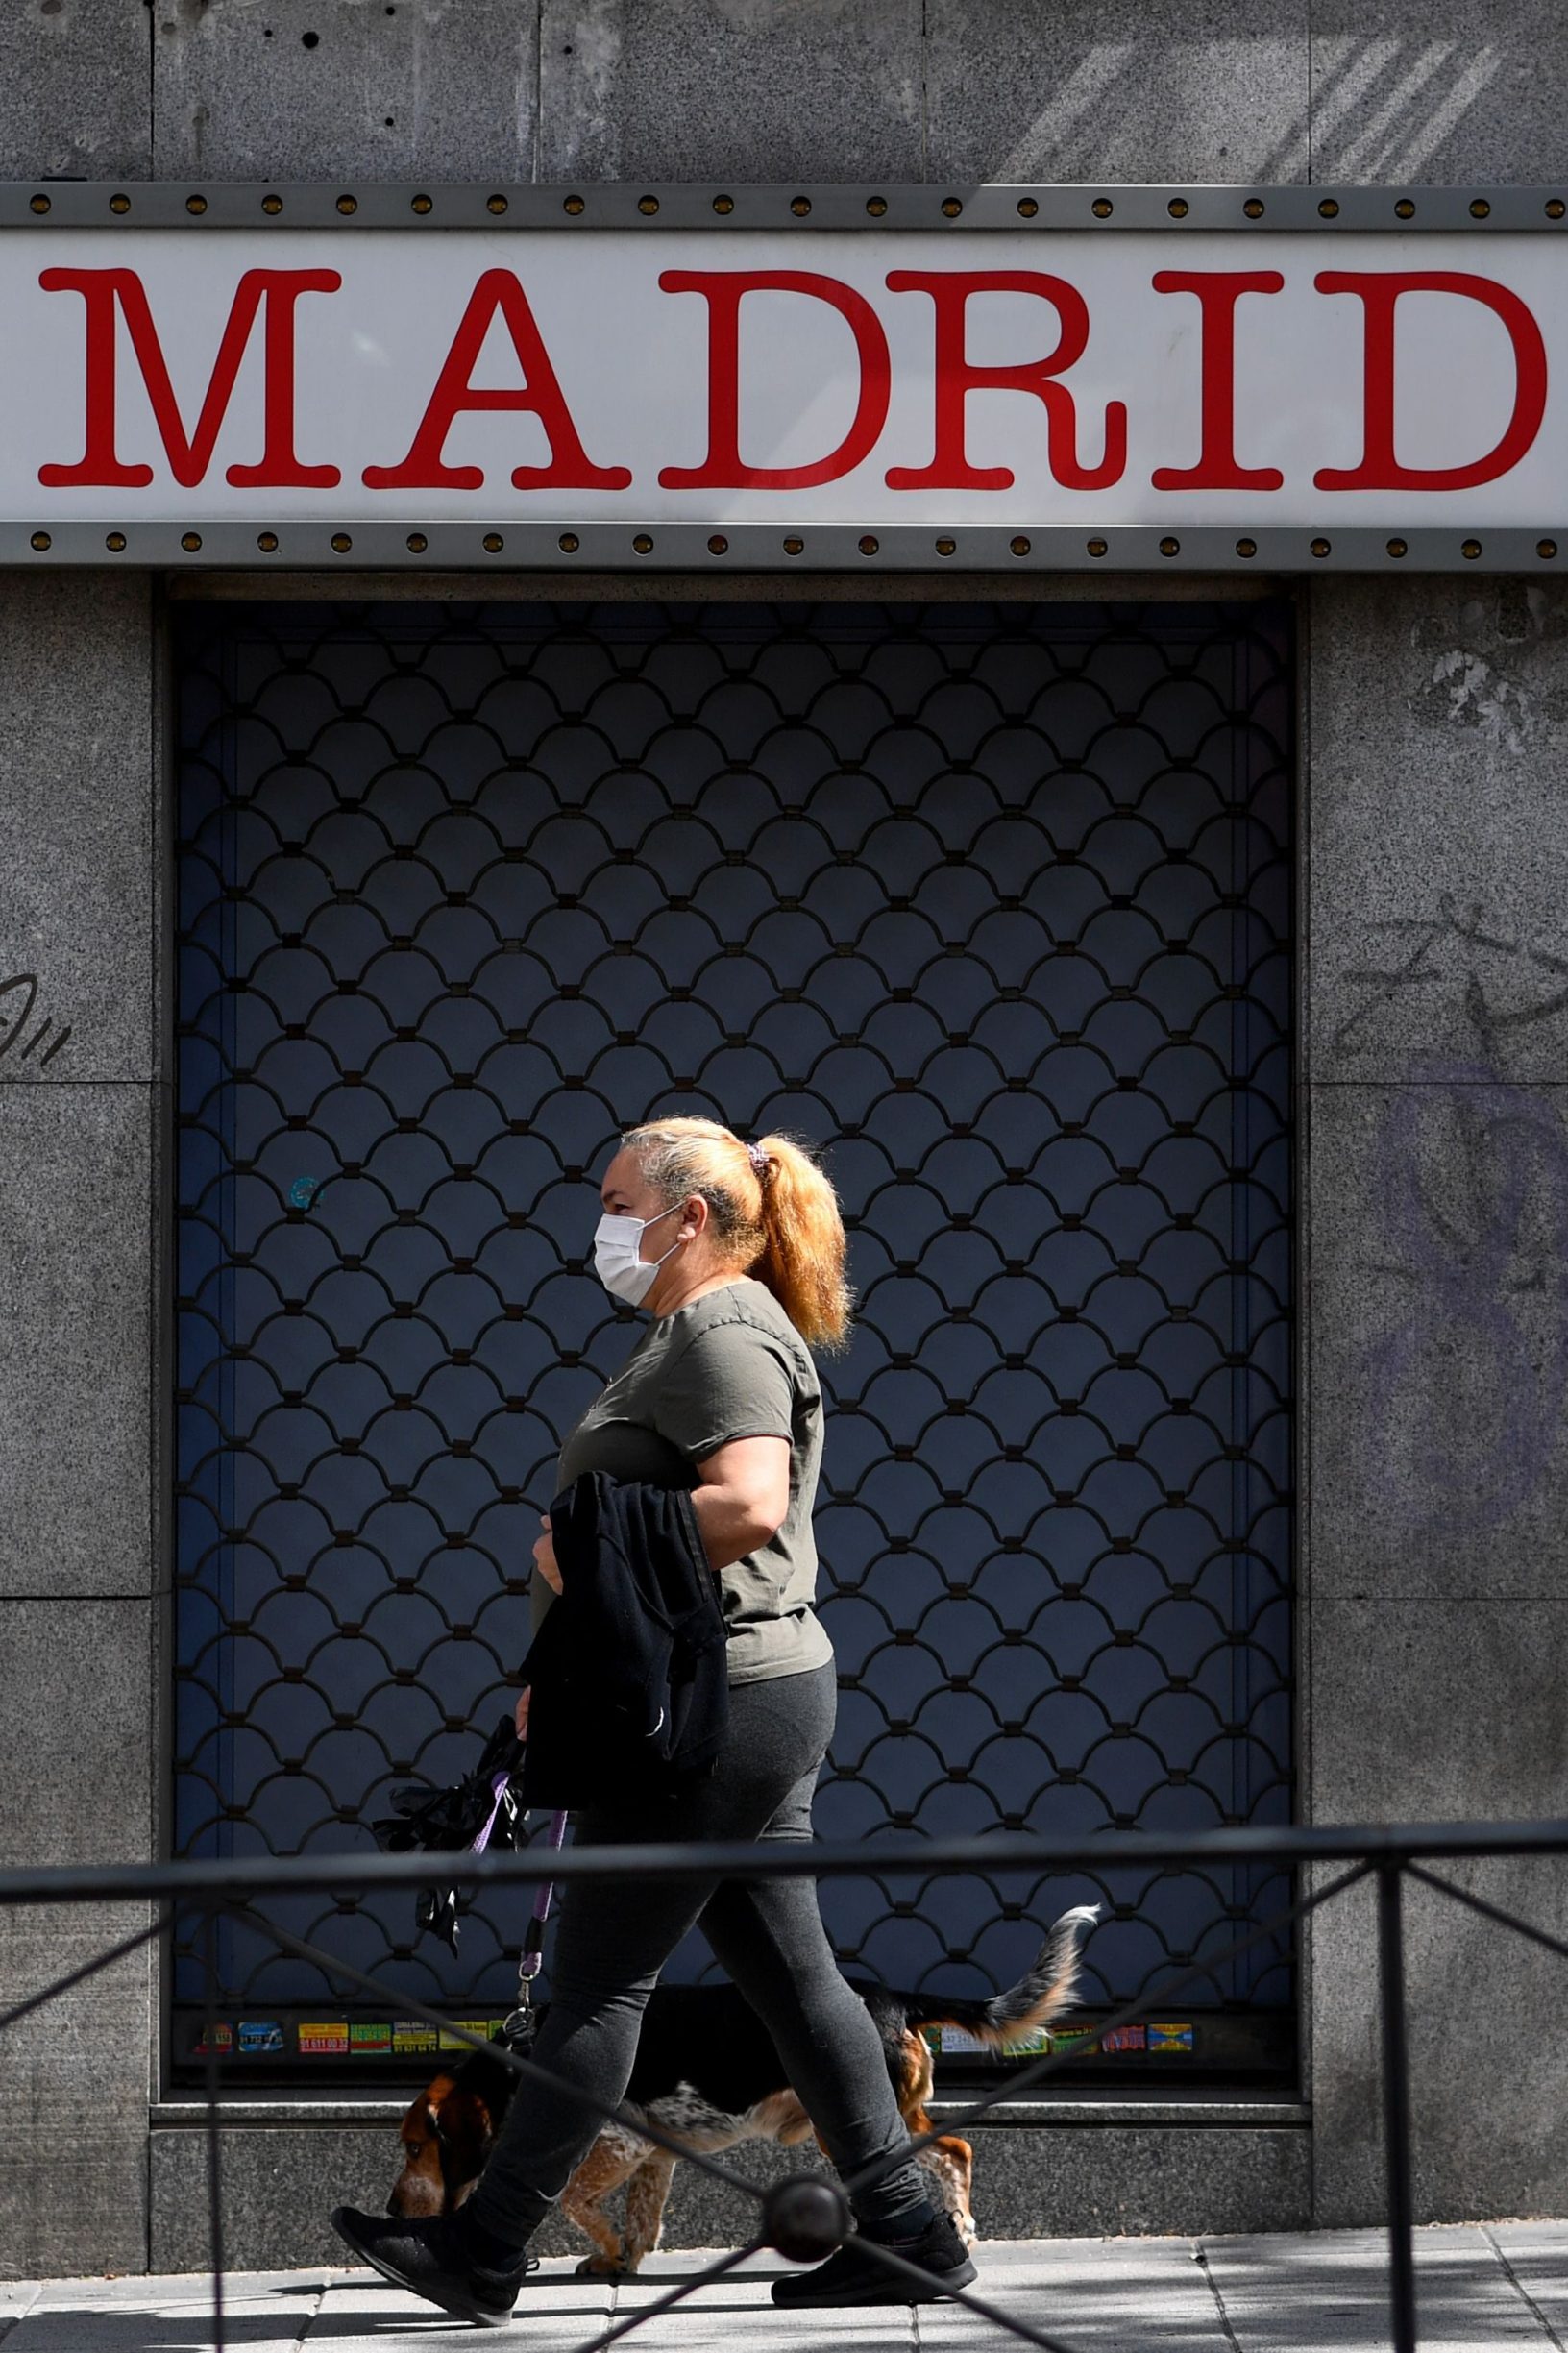 A woman, wearing a face mask, walks her dog in Puente de Vallecas, one of the poorest districts in Madrid on April 20, 2020 during a national lockdown to prevent the spread of the COVID-19 disease. - Spain said 399 people died of COVID-19 over the past 24 hours in what was the lowest daily number of deaths in four weeks, the government said. (Photo by Gabriel BOUYS / AFP)